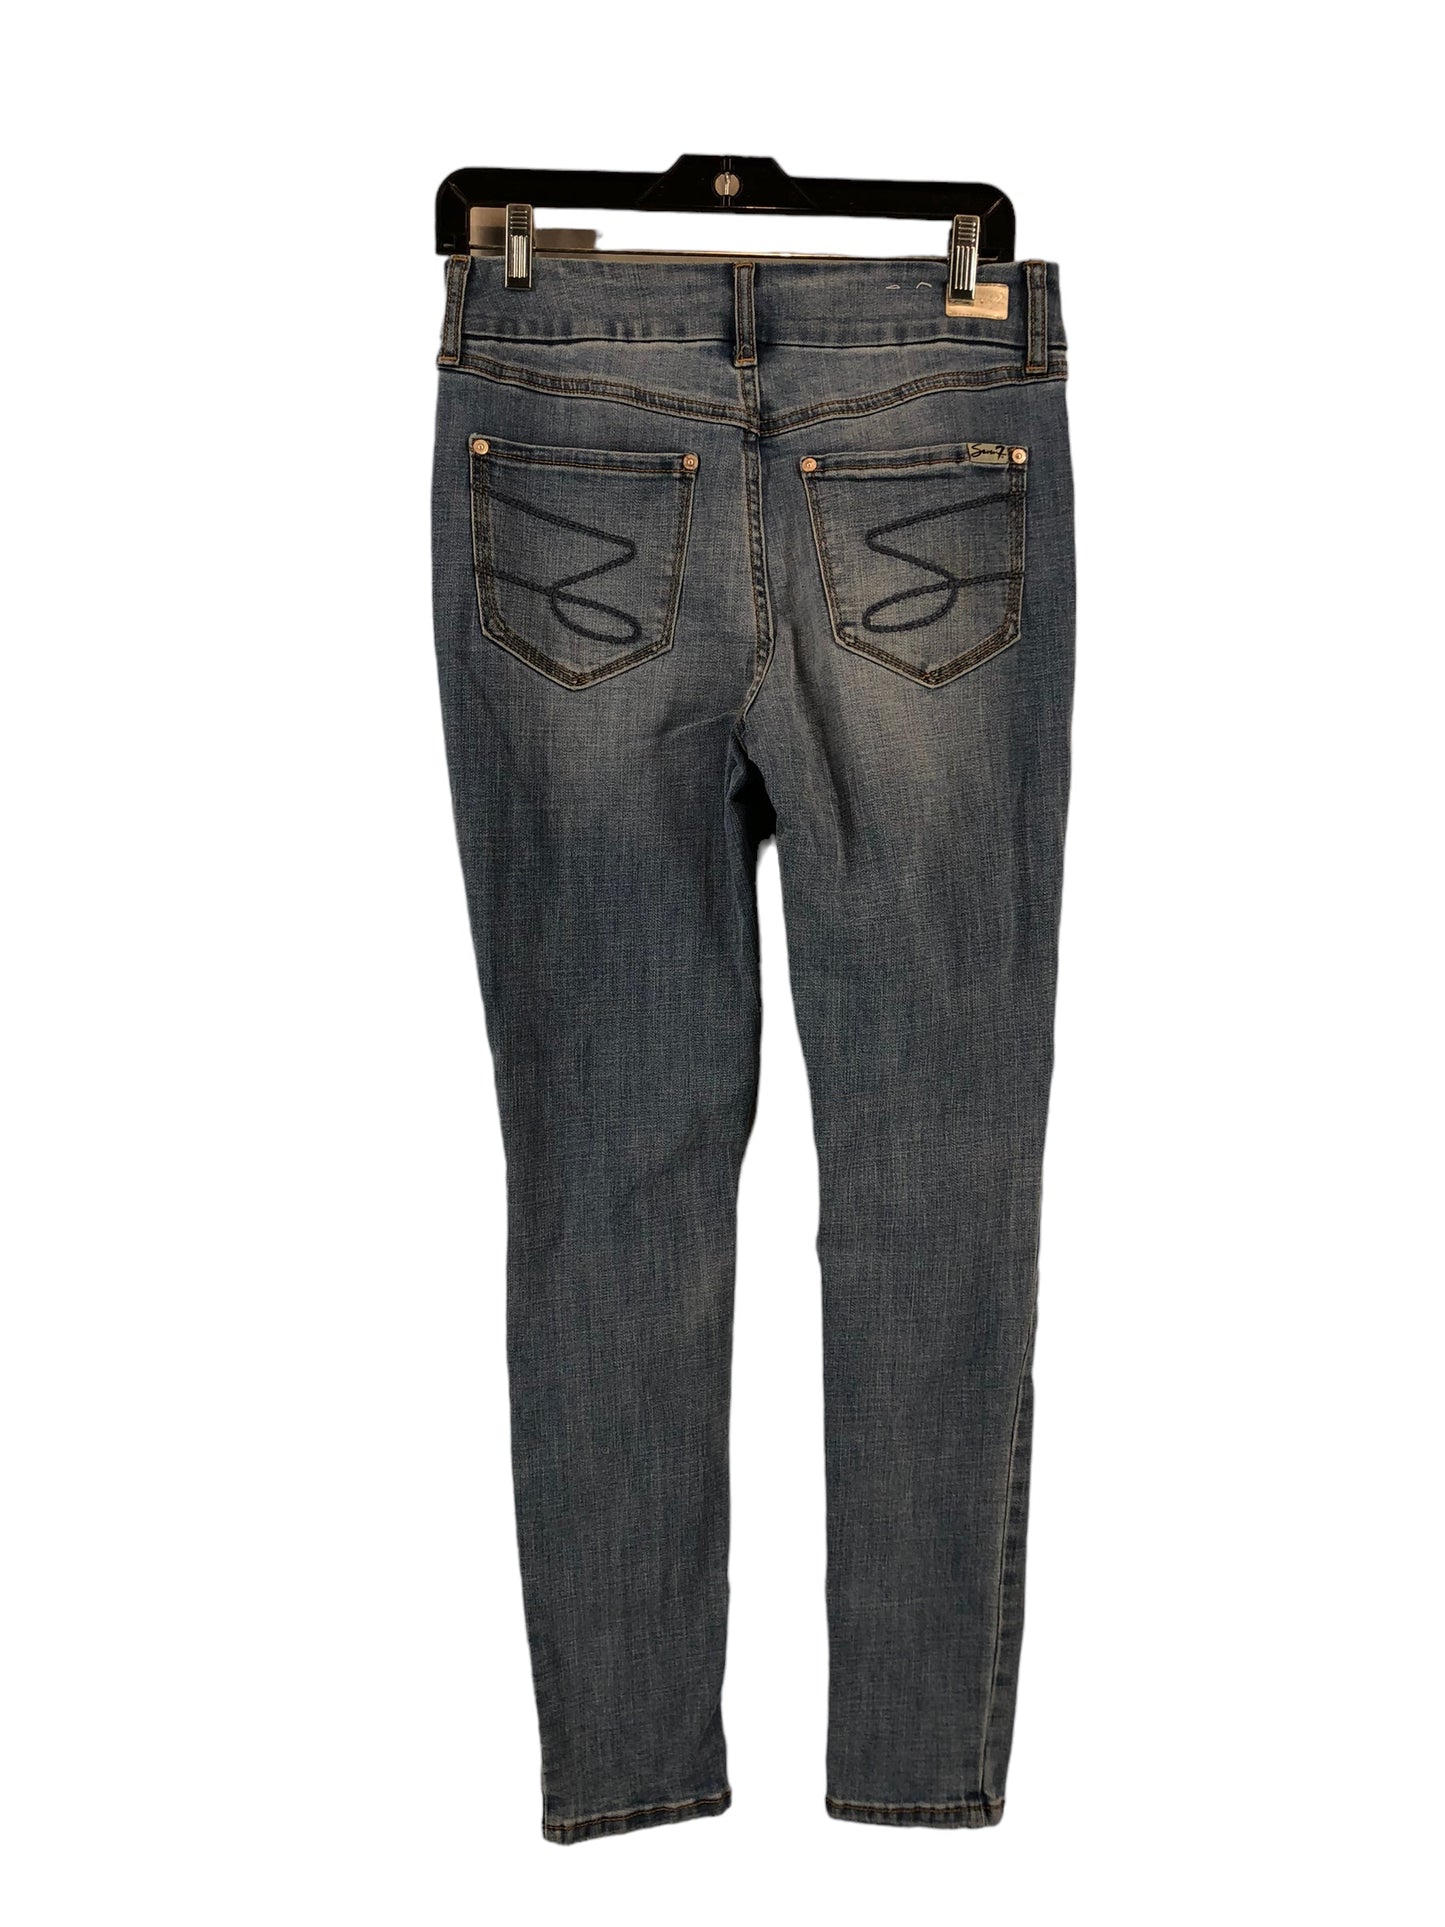 Jeans Skinny By 7 For All Mankind  Size: 6